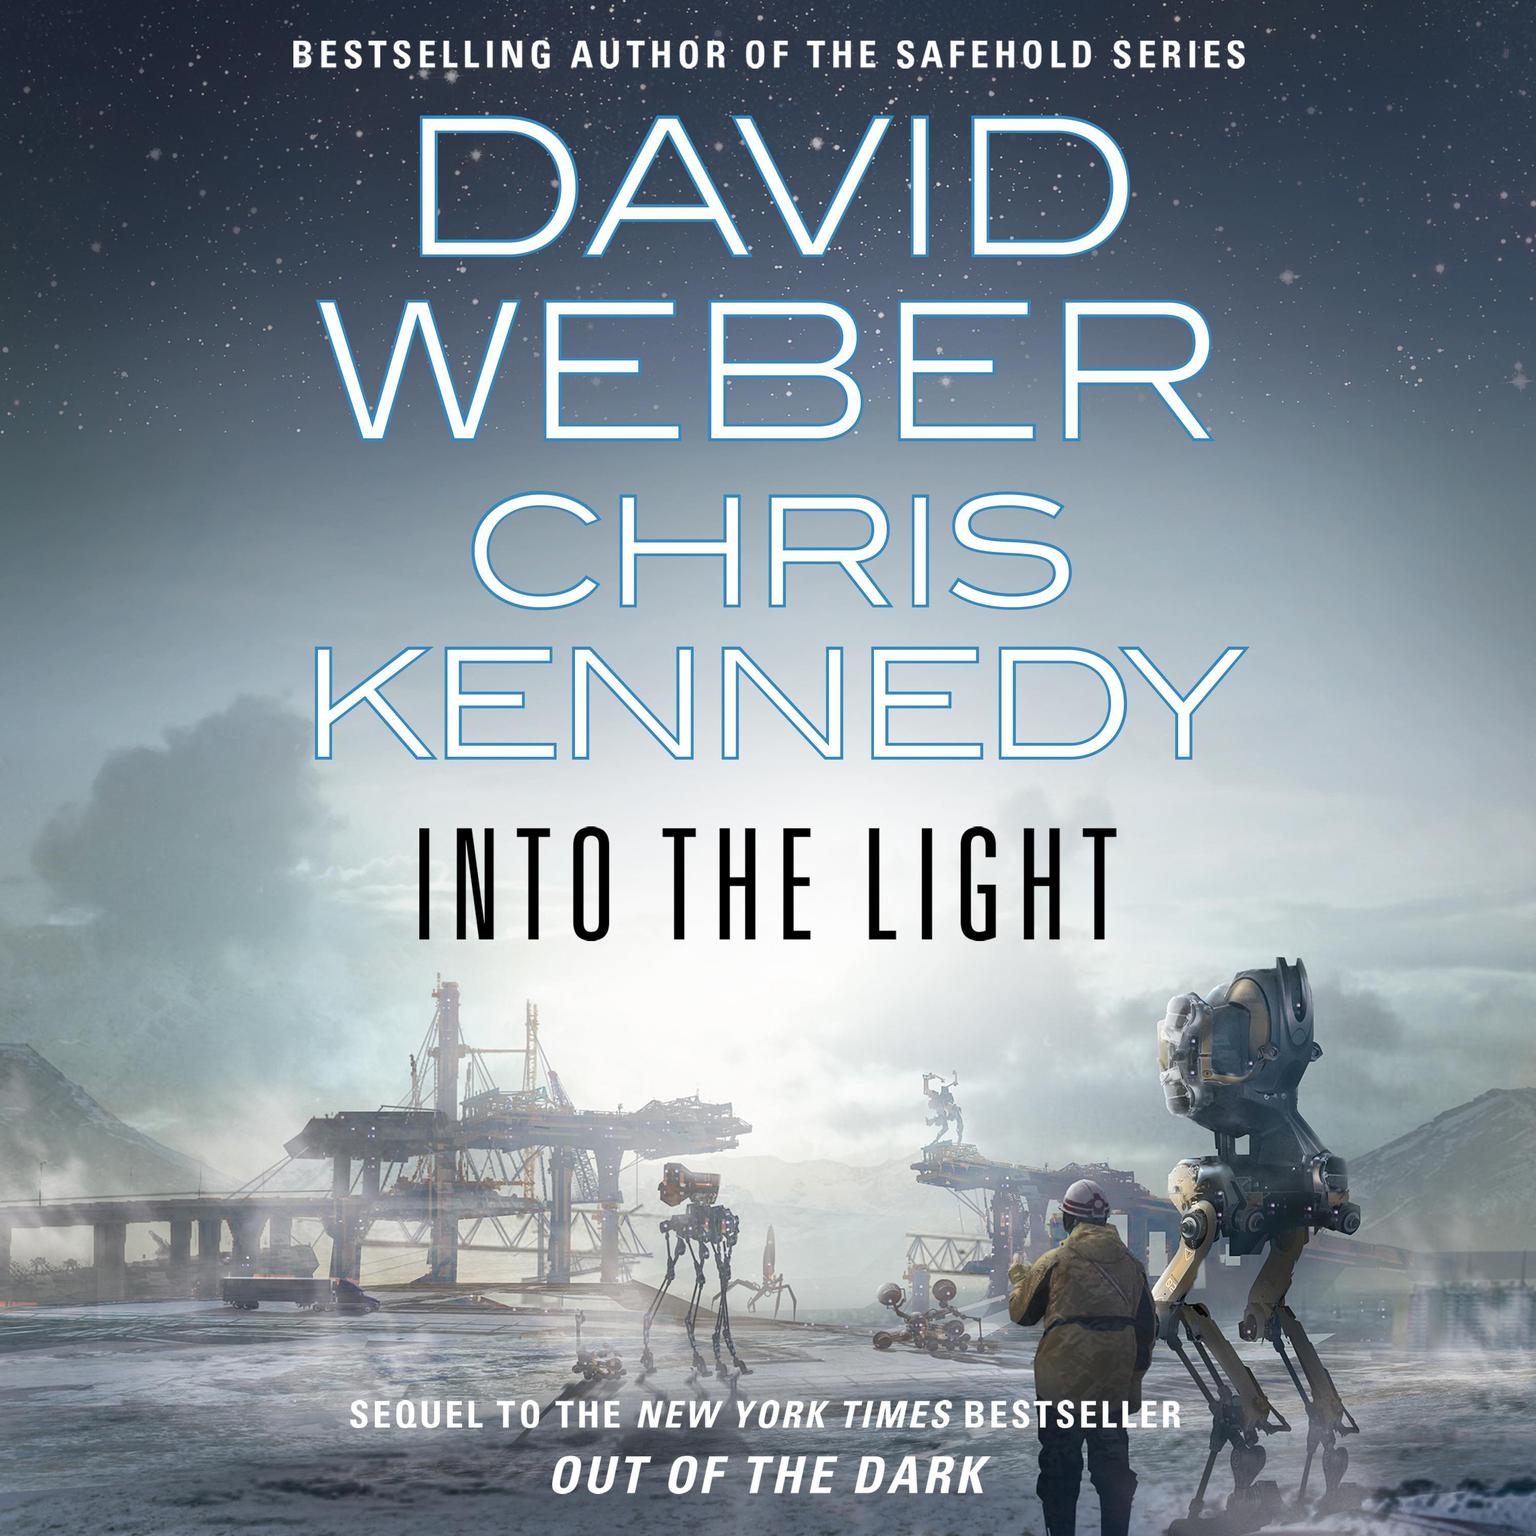 Into the Light Audiobook, by David Weber